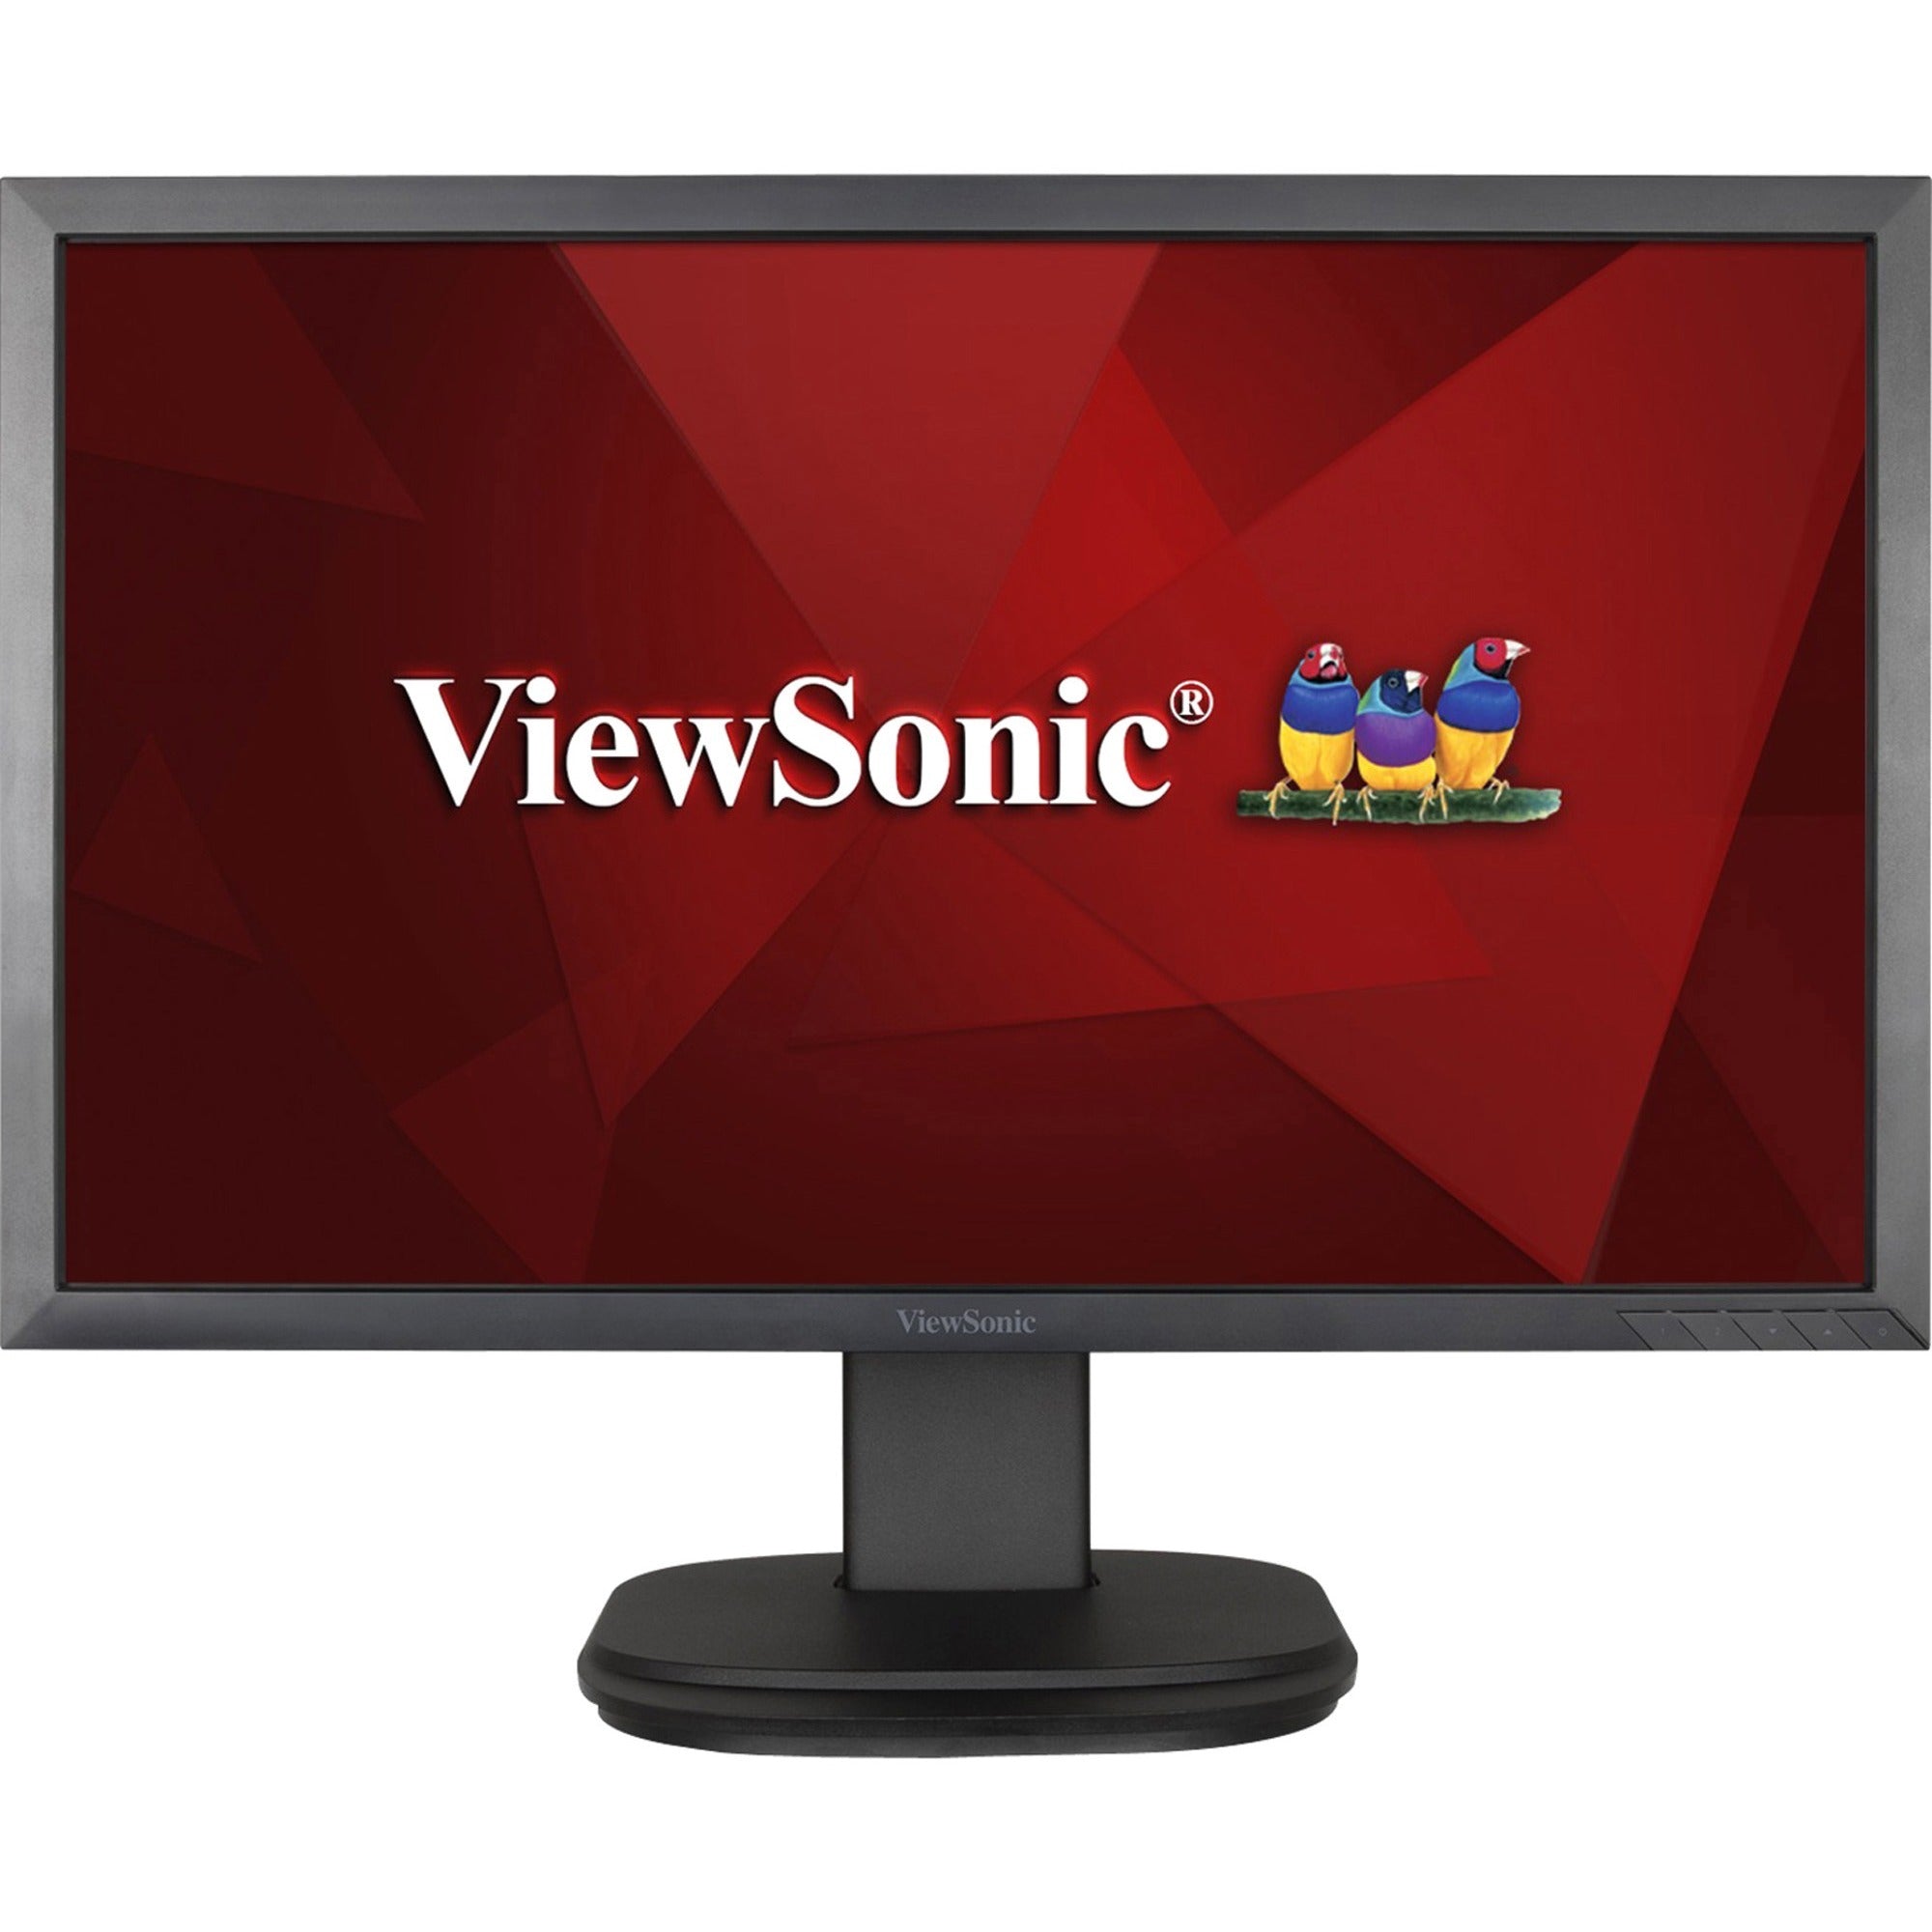 viewsonic-vg2239smh-22-inch-1080p-ergonomic-monitor-with-hdmi-displayport-and-vga-for-home-and-office-ergonomic-vg2239smh-1080p-monitor-with-hdmi-displayport-and-vga-250-cd-m2-22_vewvg2239smh - 1